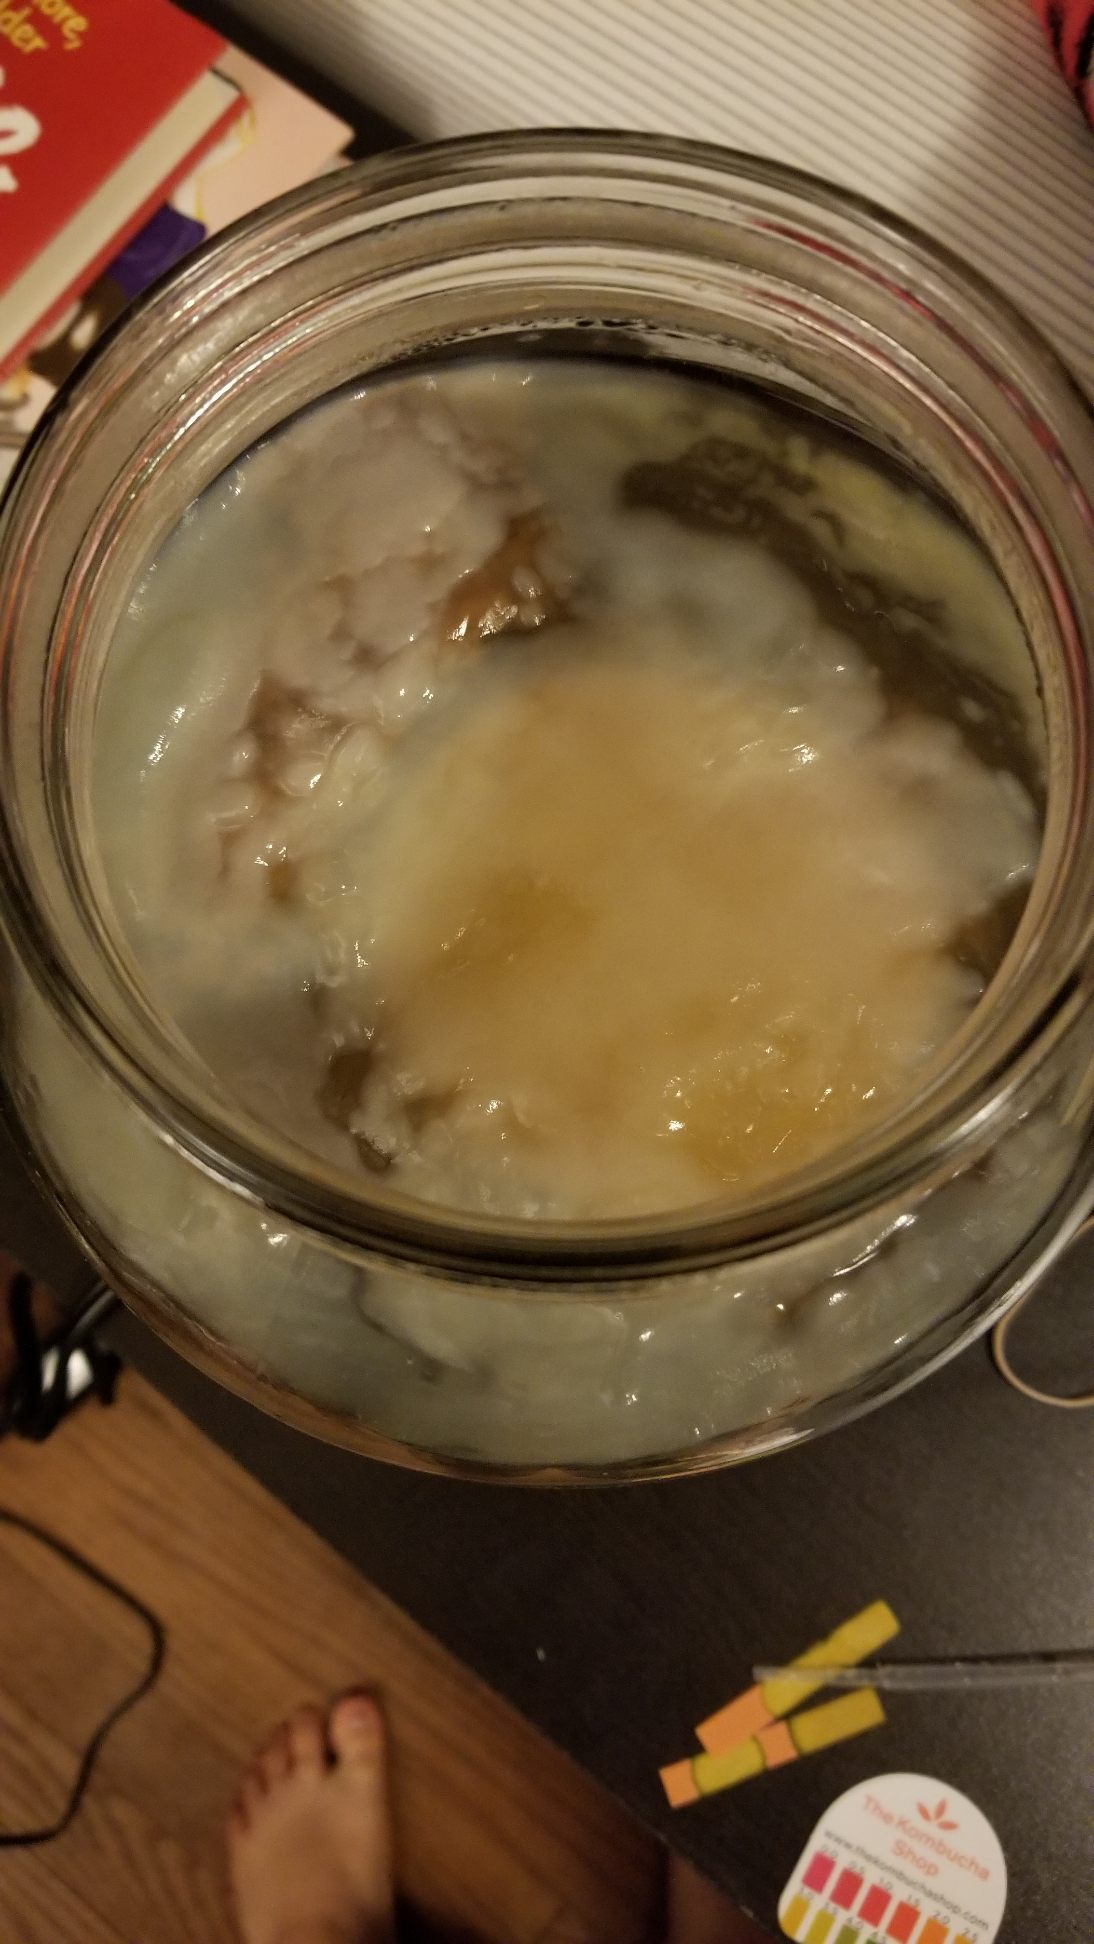 Day 7 Scoby